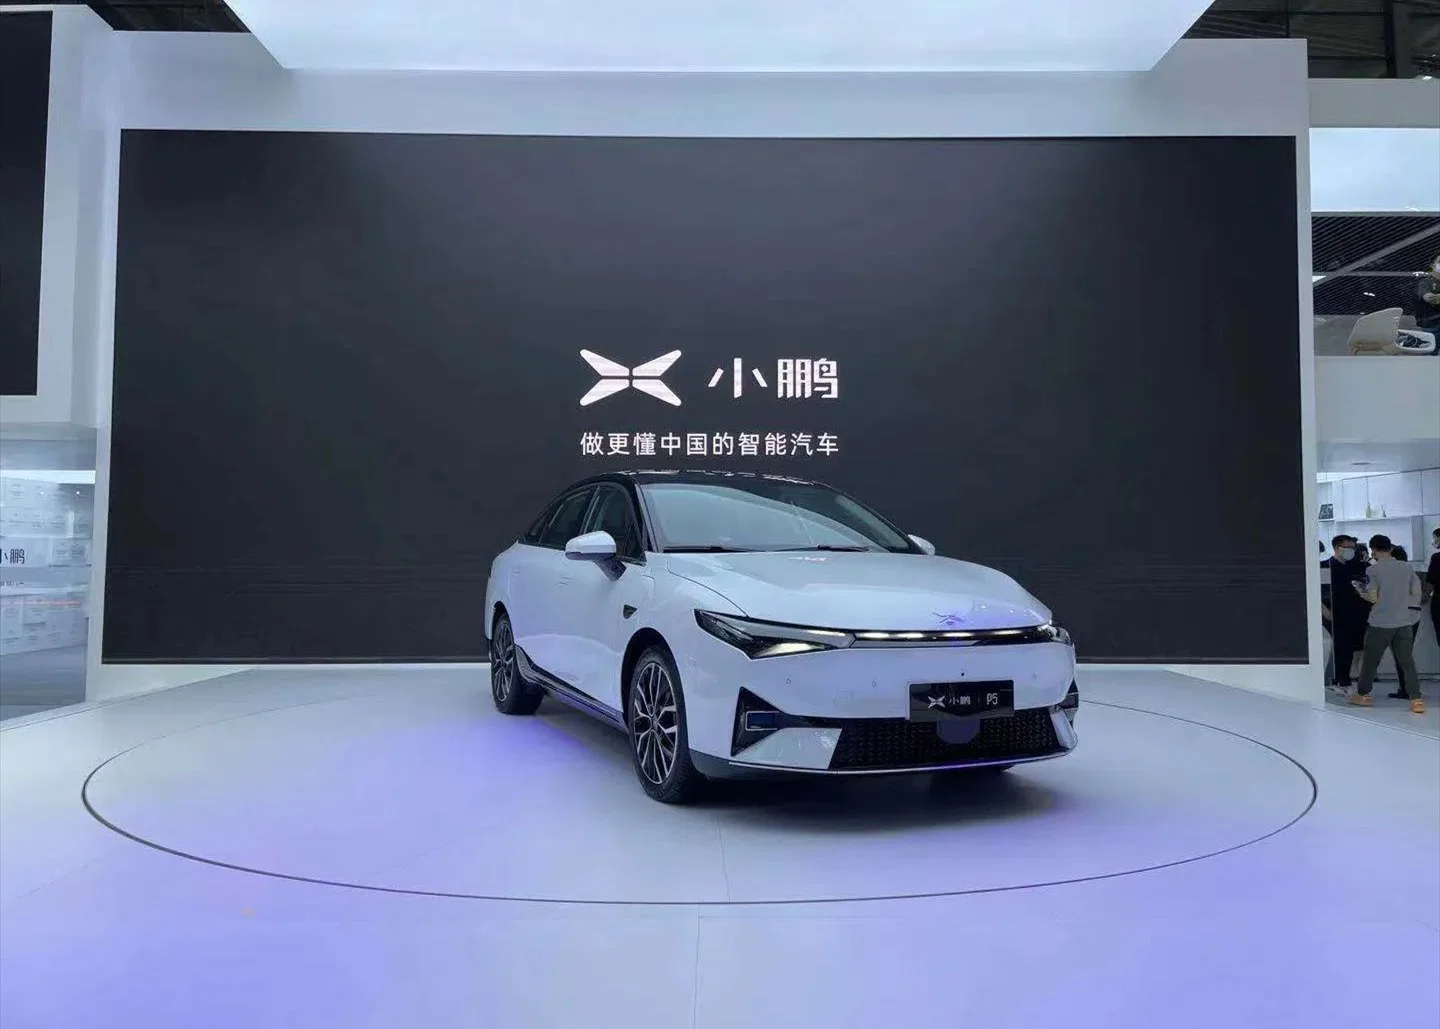 The Latest of Sedan Car Xpeng P7 Electric Vehicles